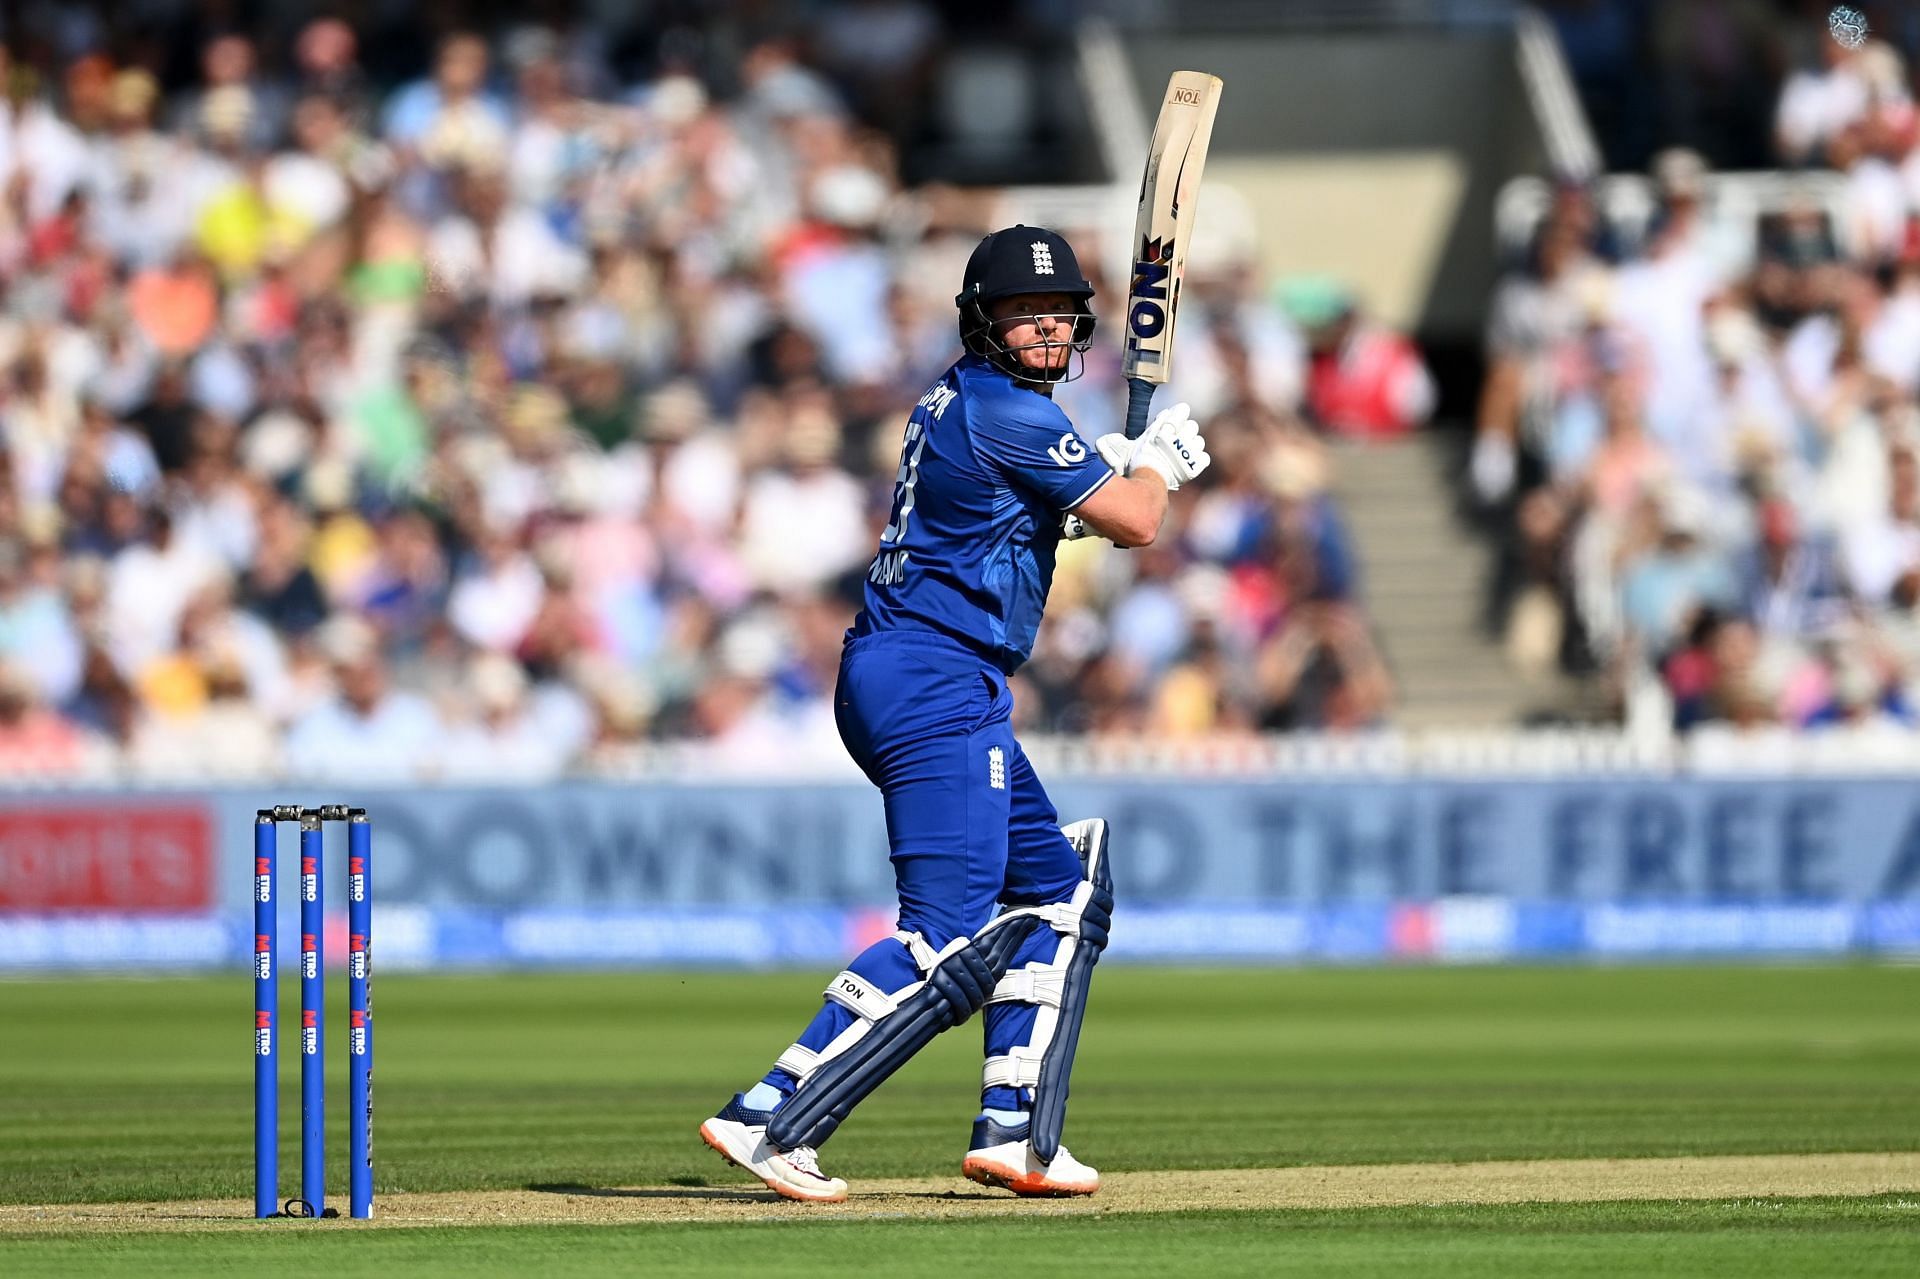 England opener Jonny Bairstow (Pic: Getty Images)